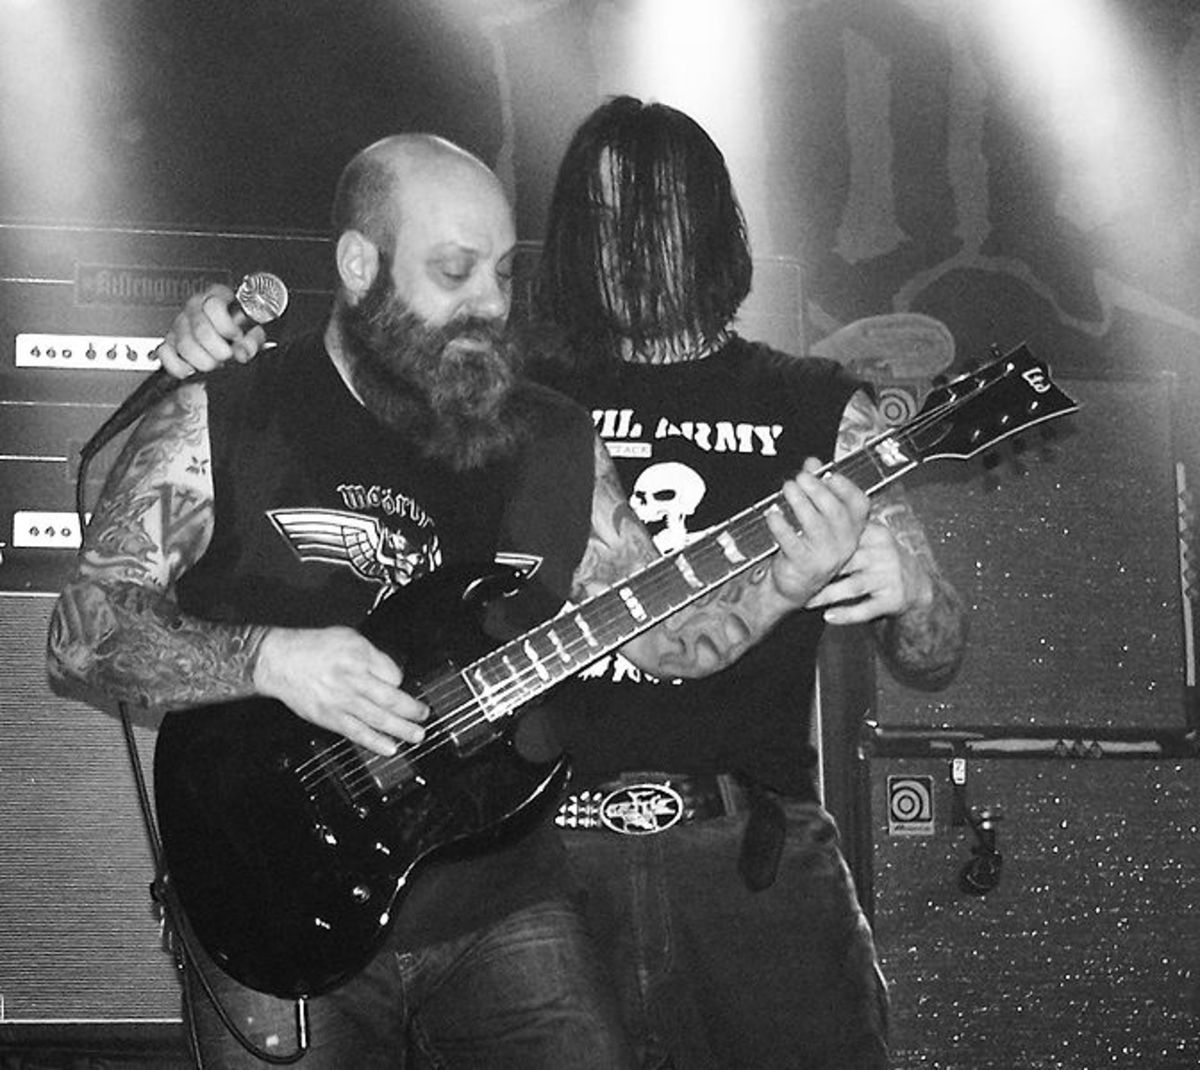 Kirk Windstein and Phil Anselmo of Down in concert in Prague, 2008.